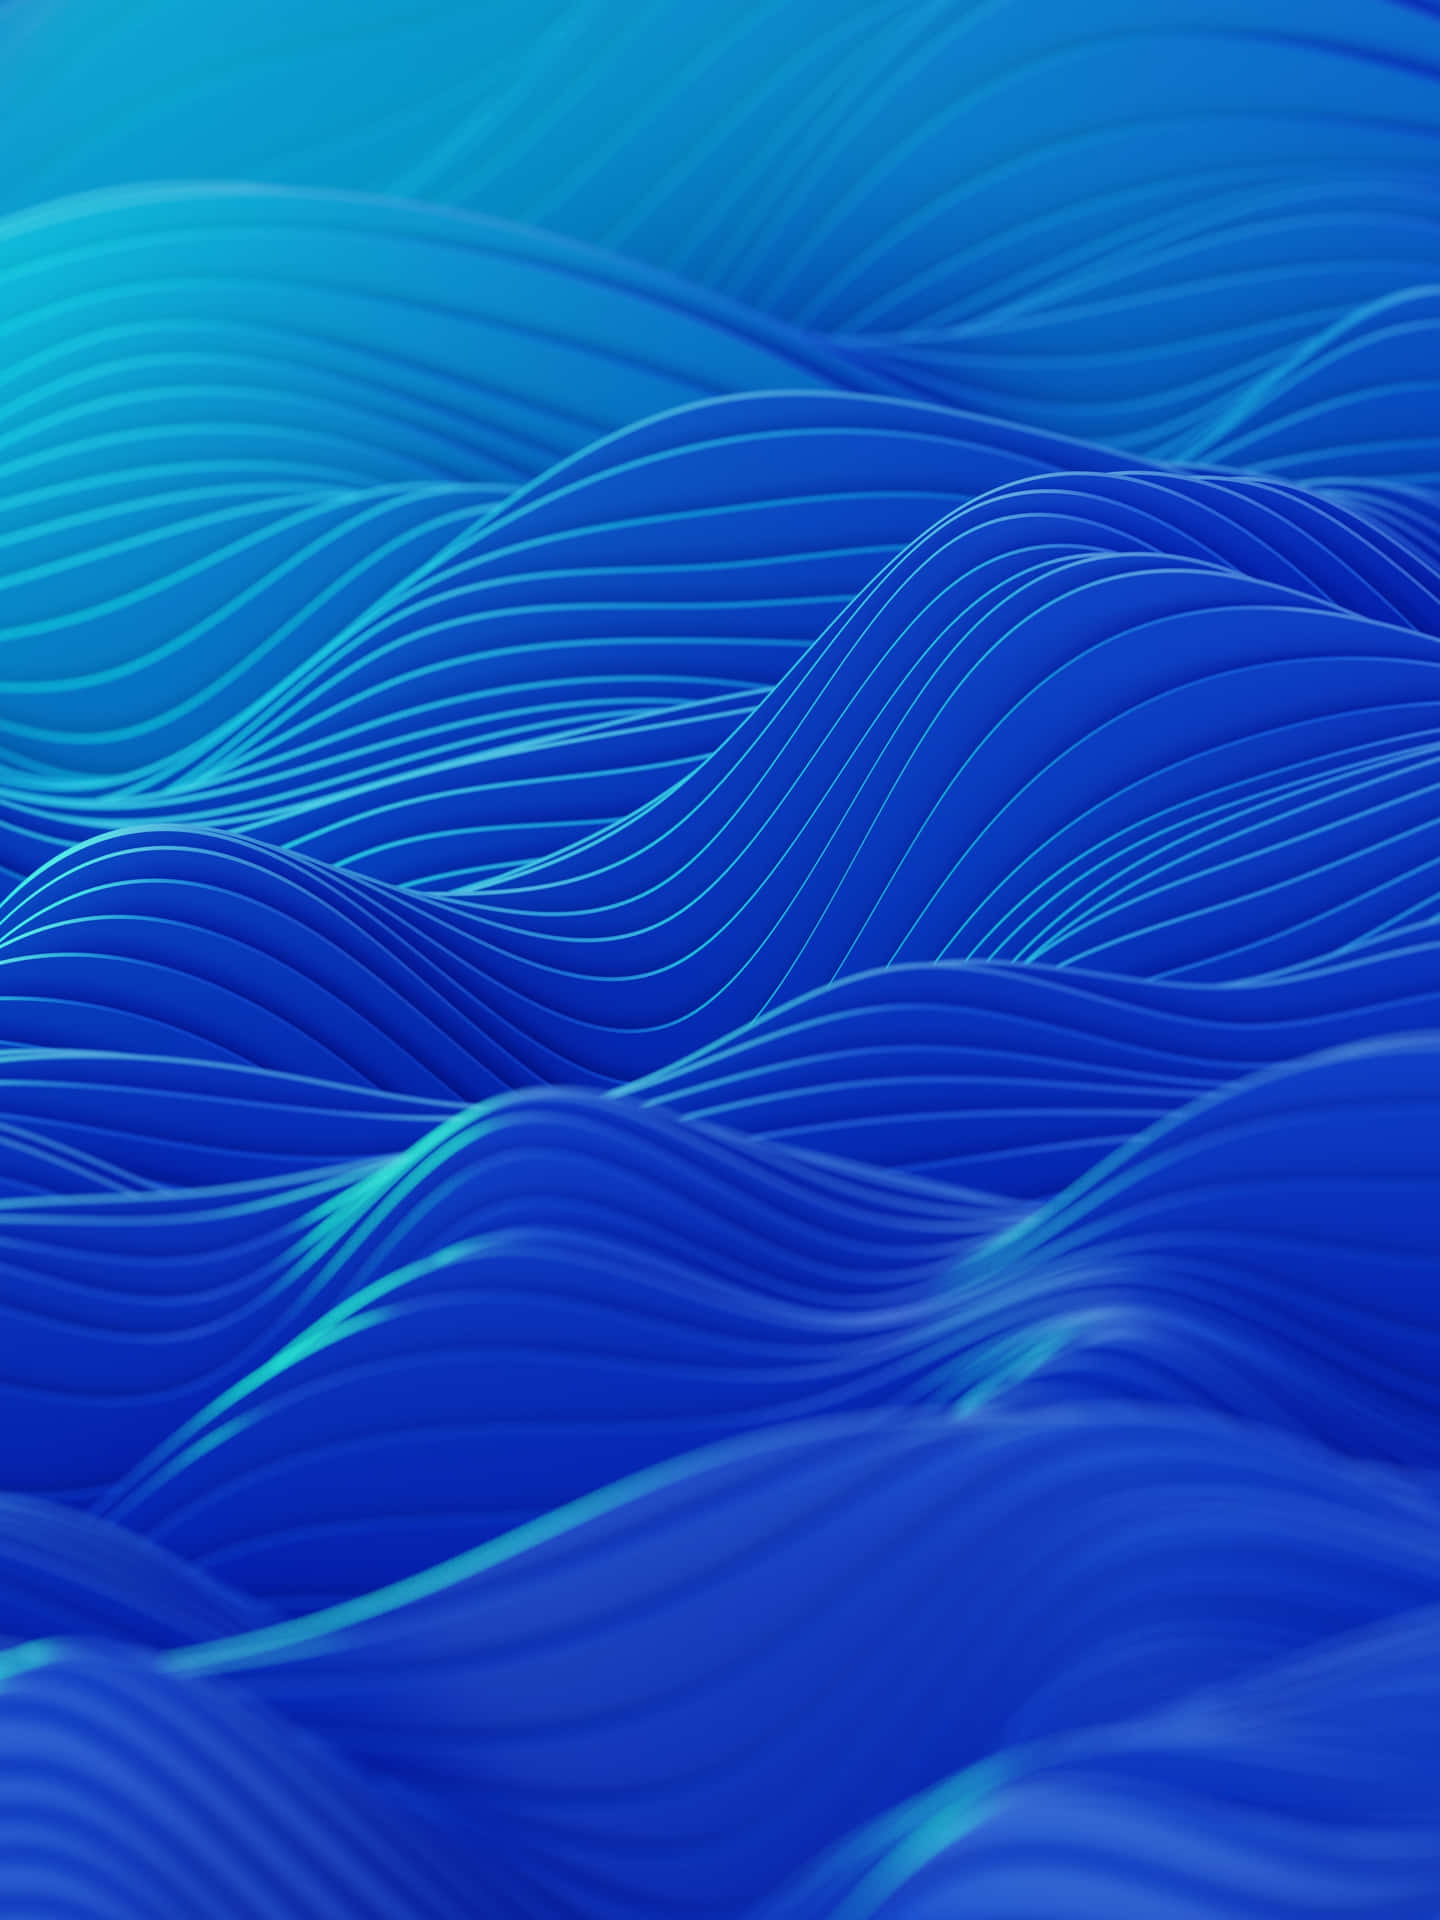 Blue Wave Background With Wavy Lines